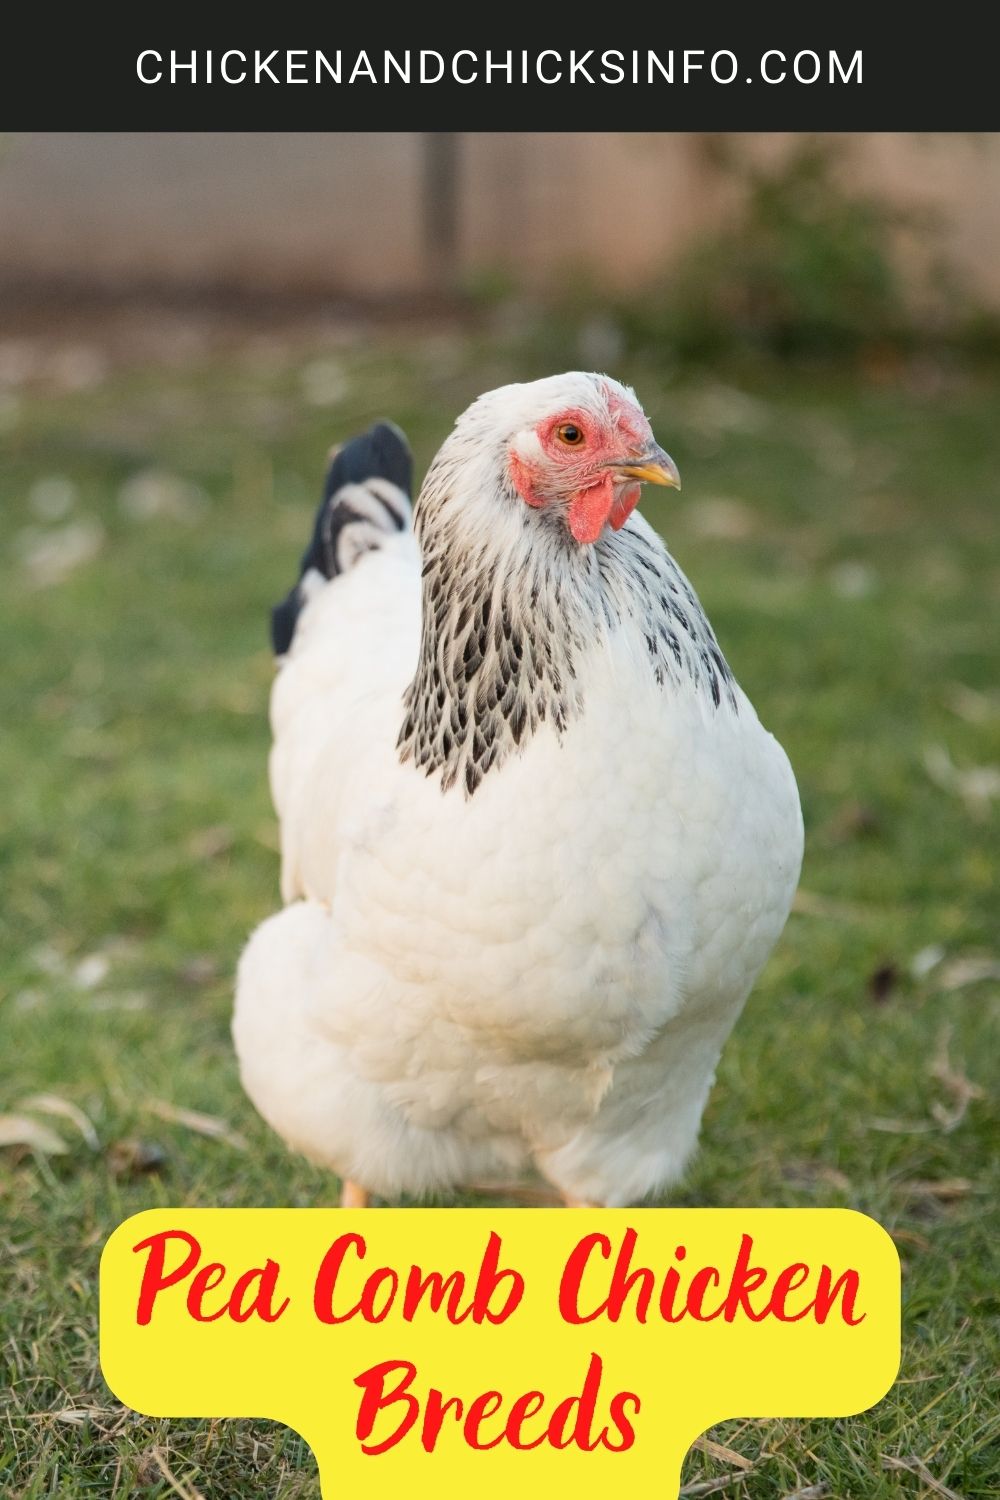 Pea Comb Chicken Breeds poster.
